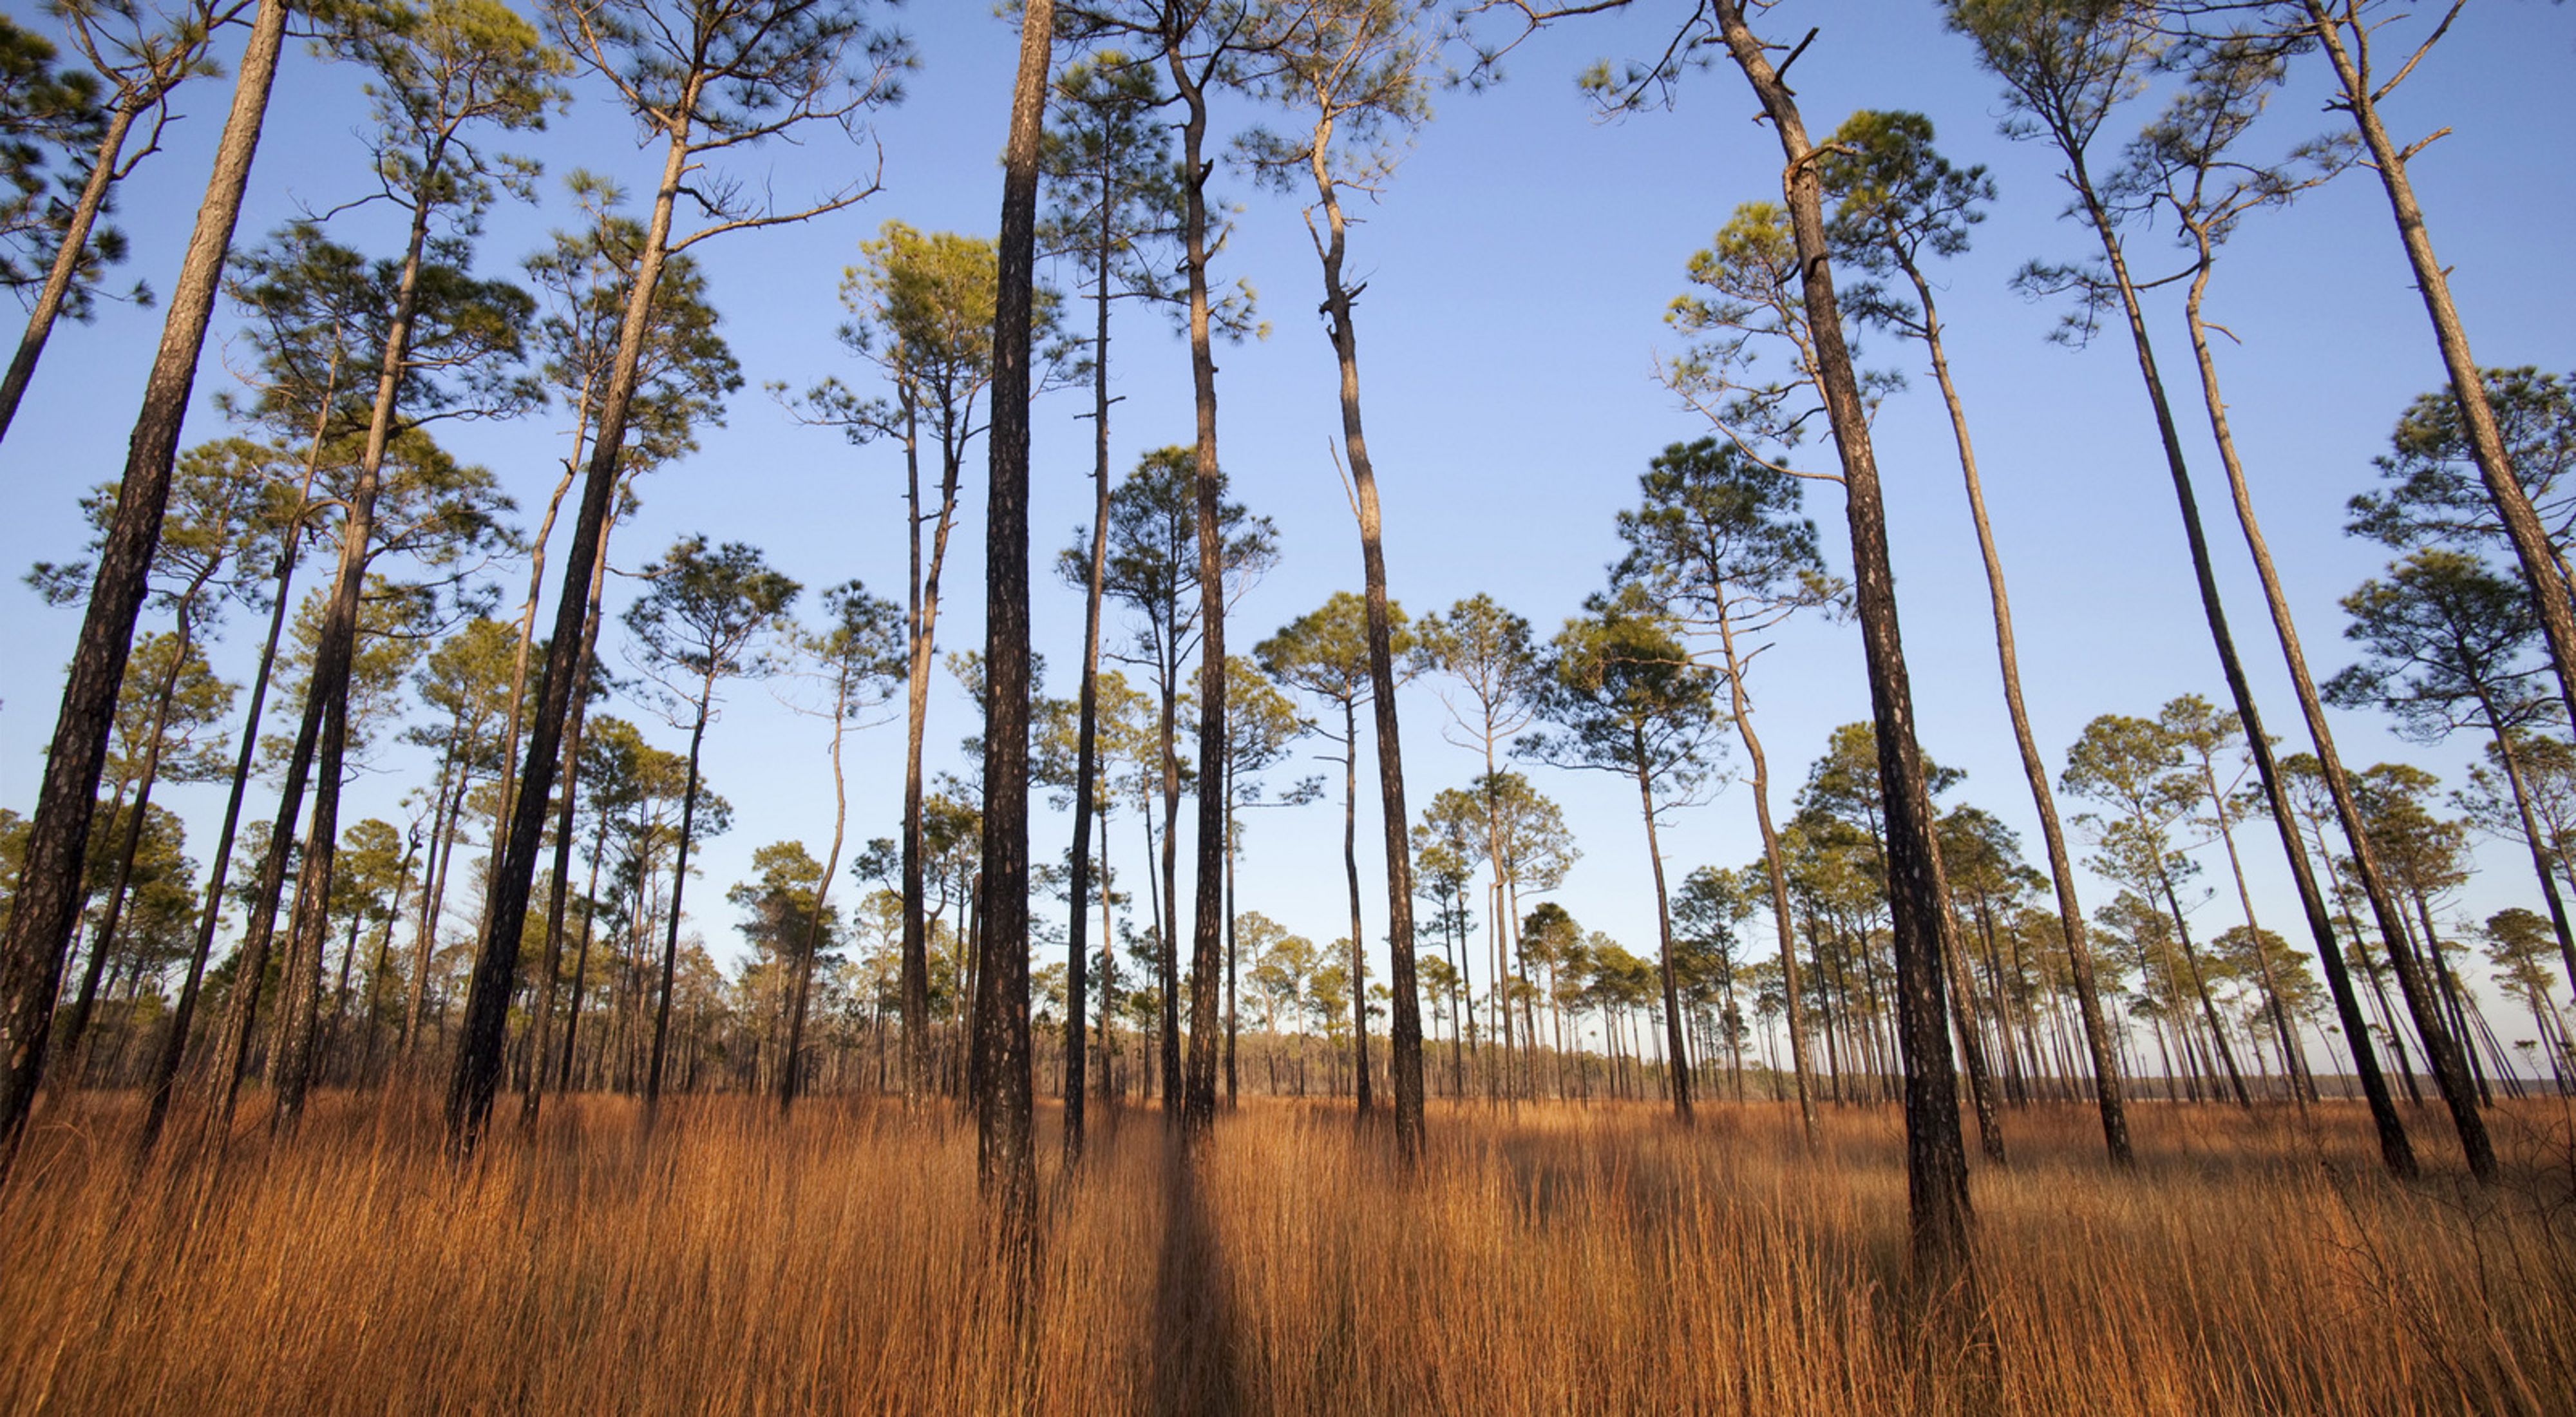 Grand Bay National Wildlife Refuge with tall standing trees and grass